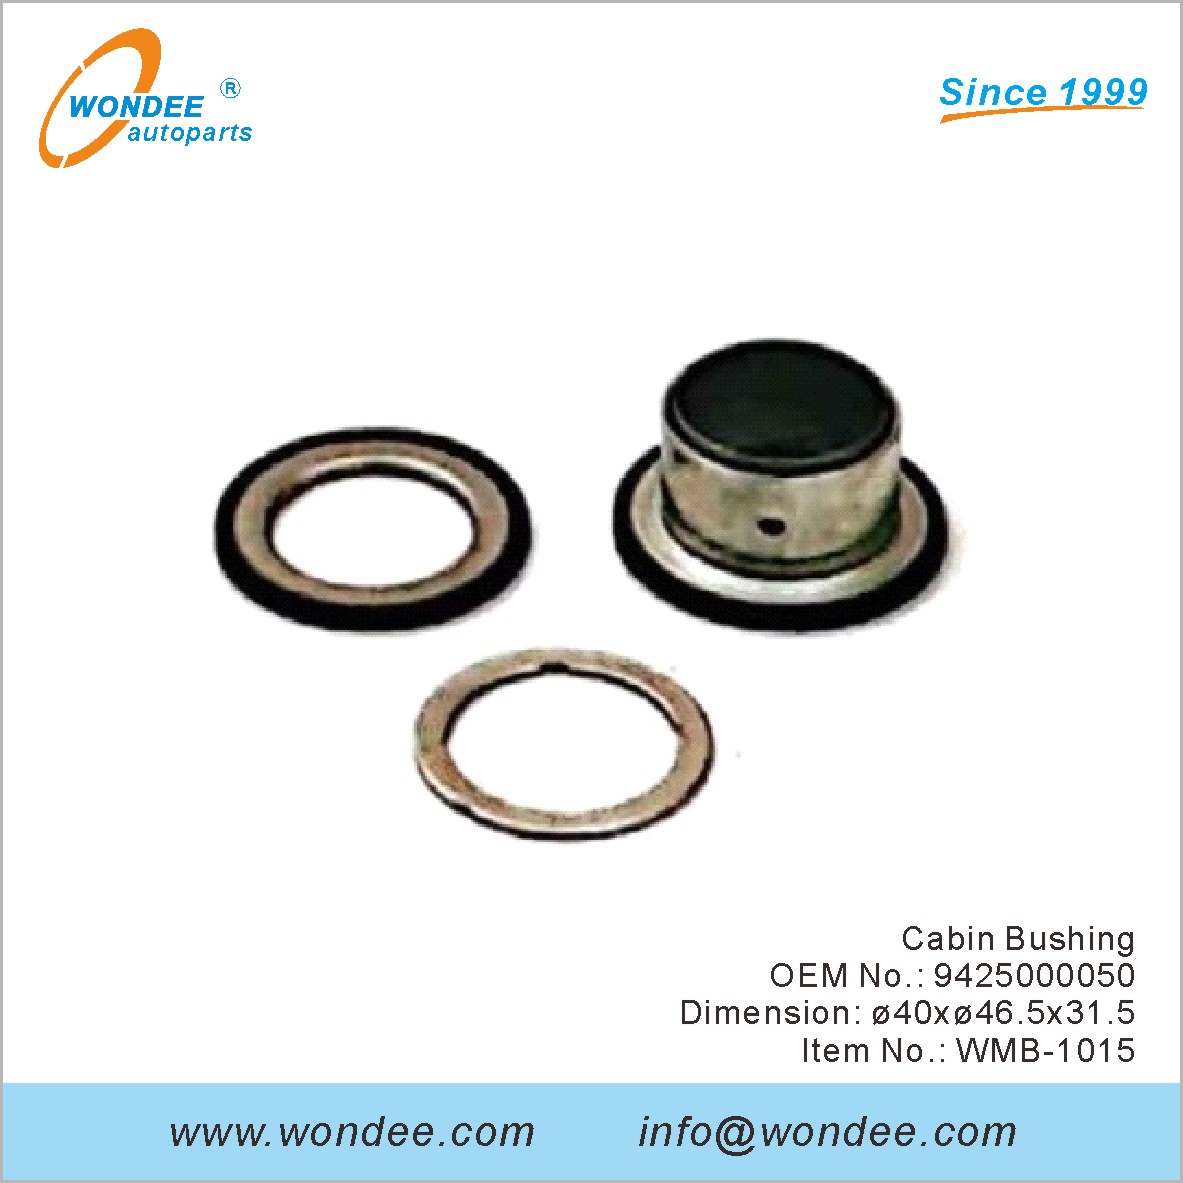 Cabin Bushing OEM 9425000050 for Benz from WONDEE